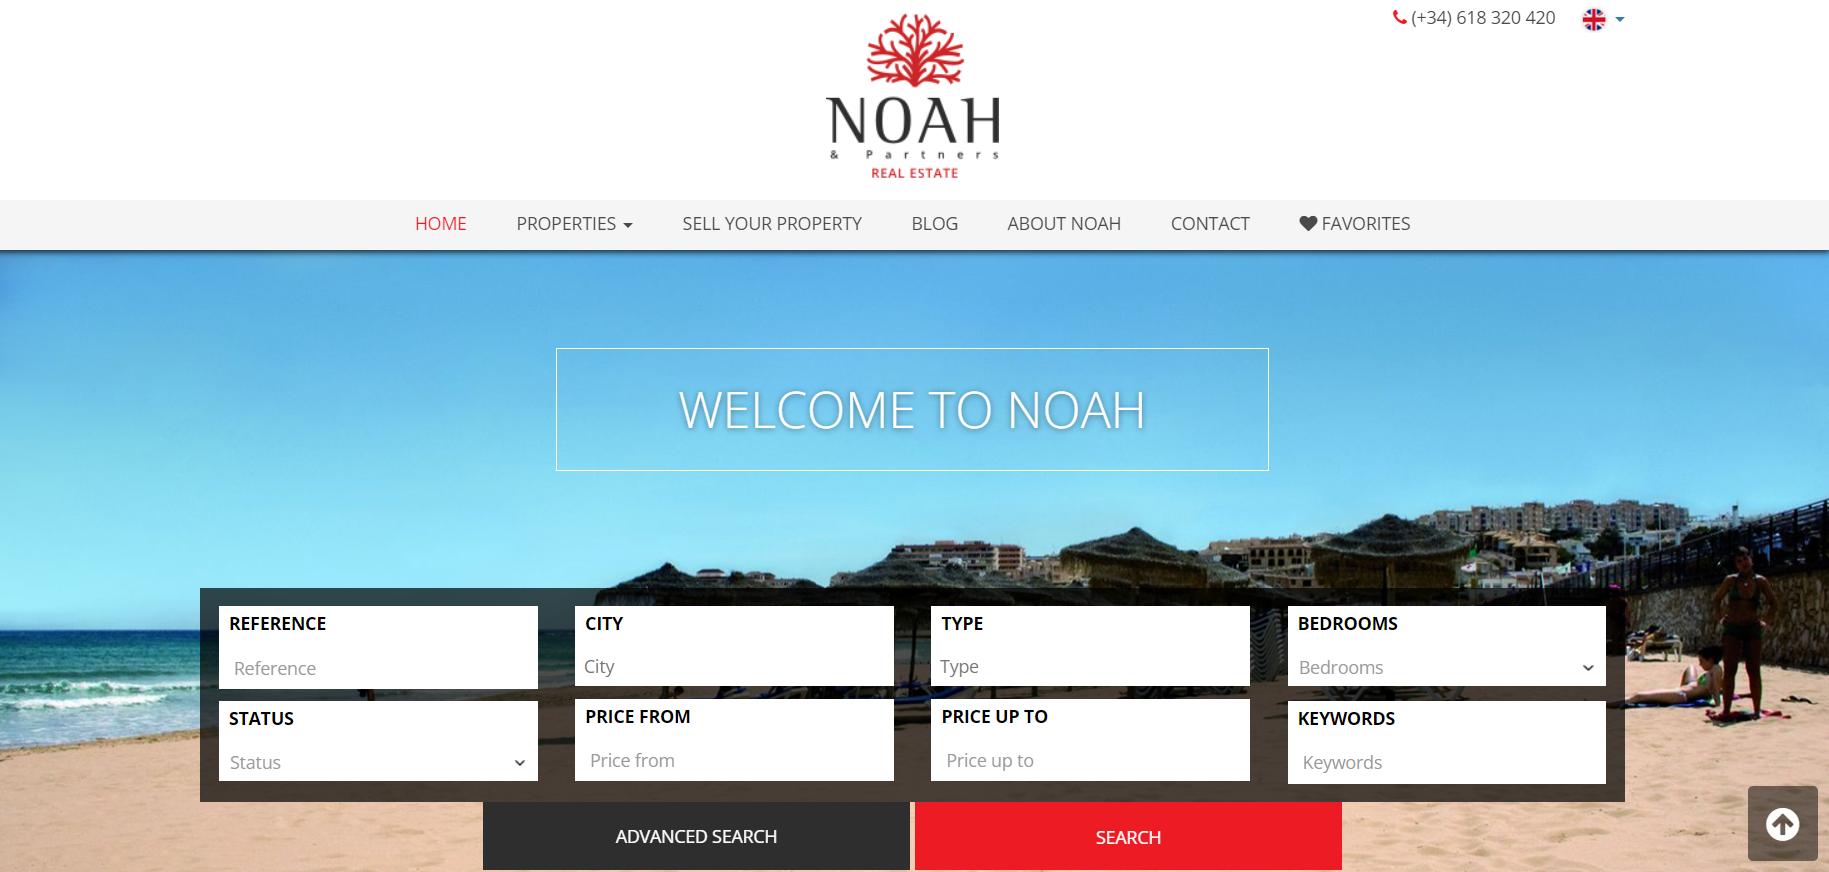 Clients’ experiences with NOAH & PARTNERS REAL ESTATE in Spain raise doubts about the quality of their services